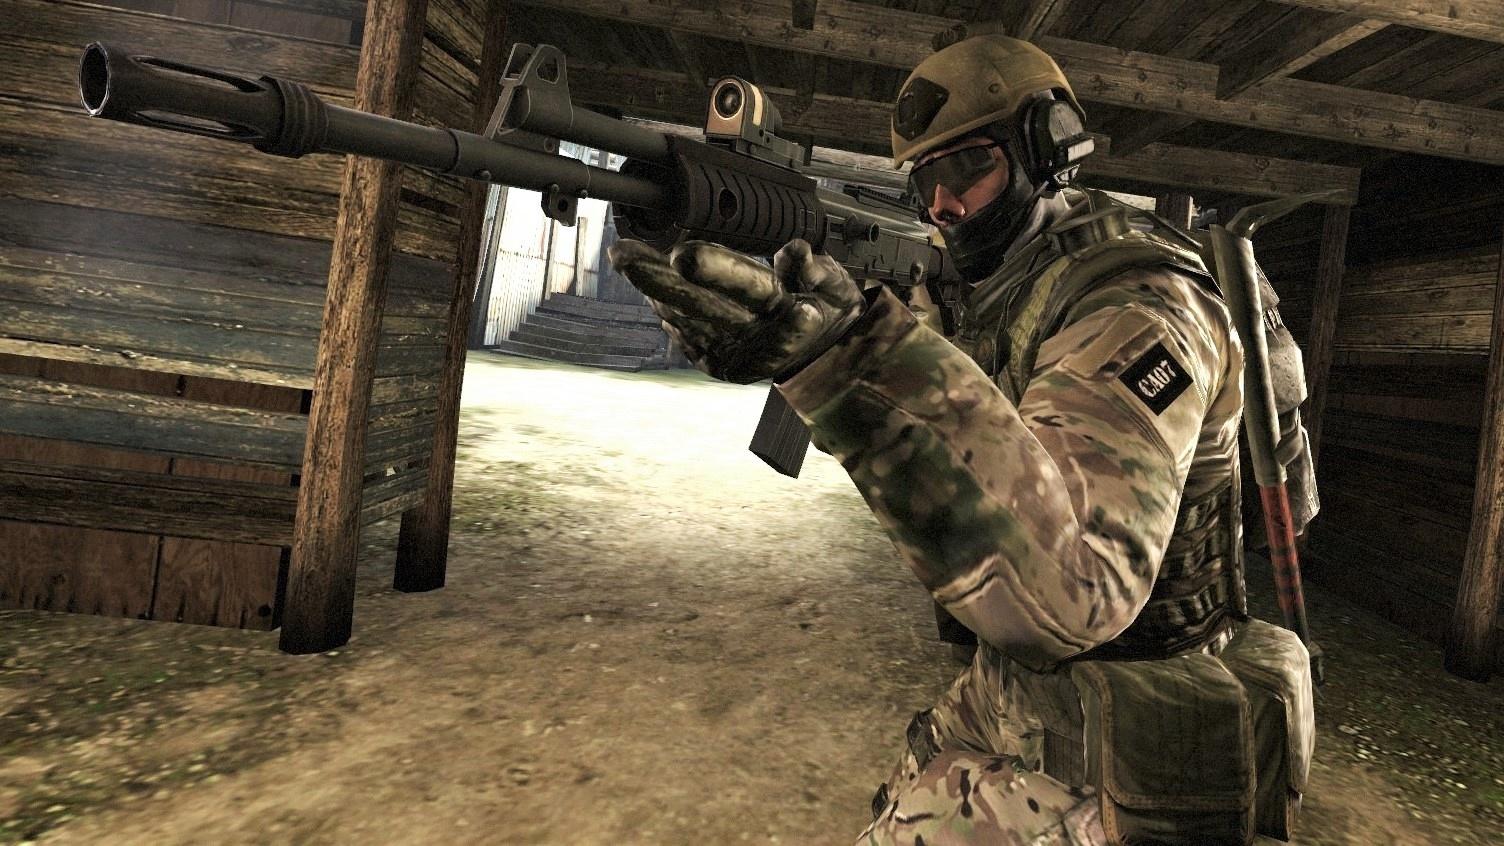 Counter-Strike 2 Release Date Potentially Teased by Valve!